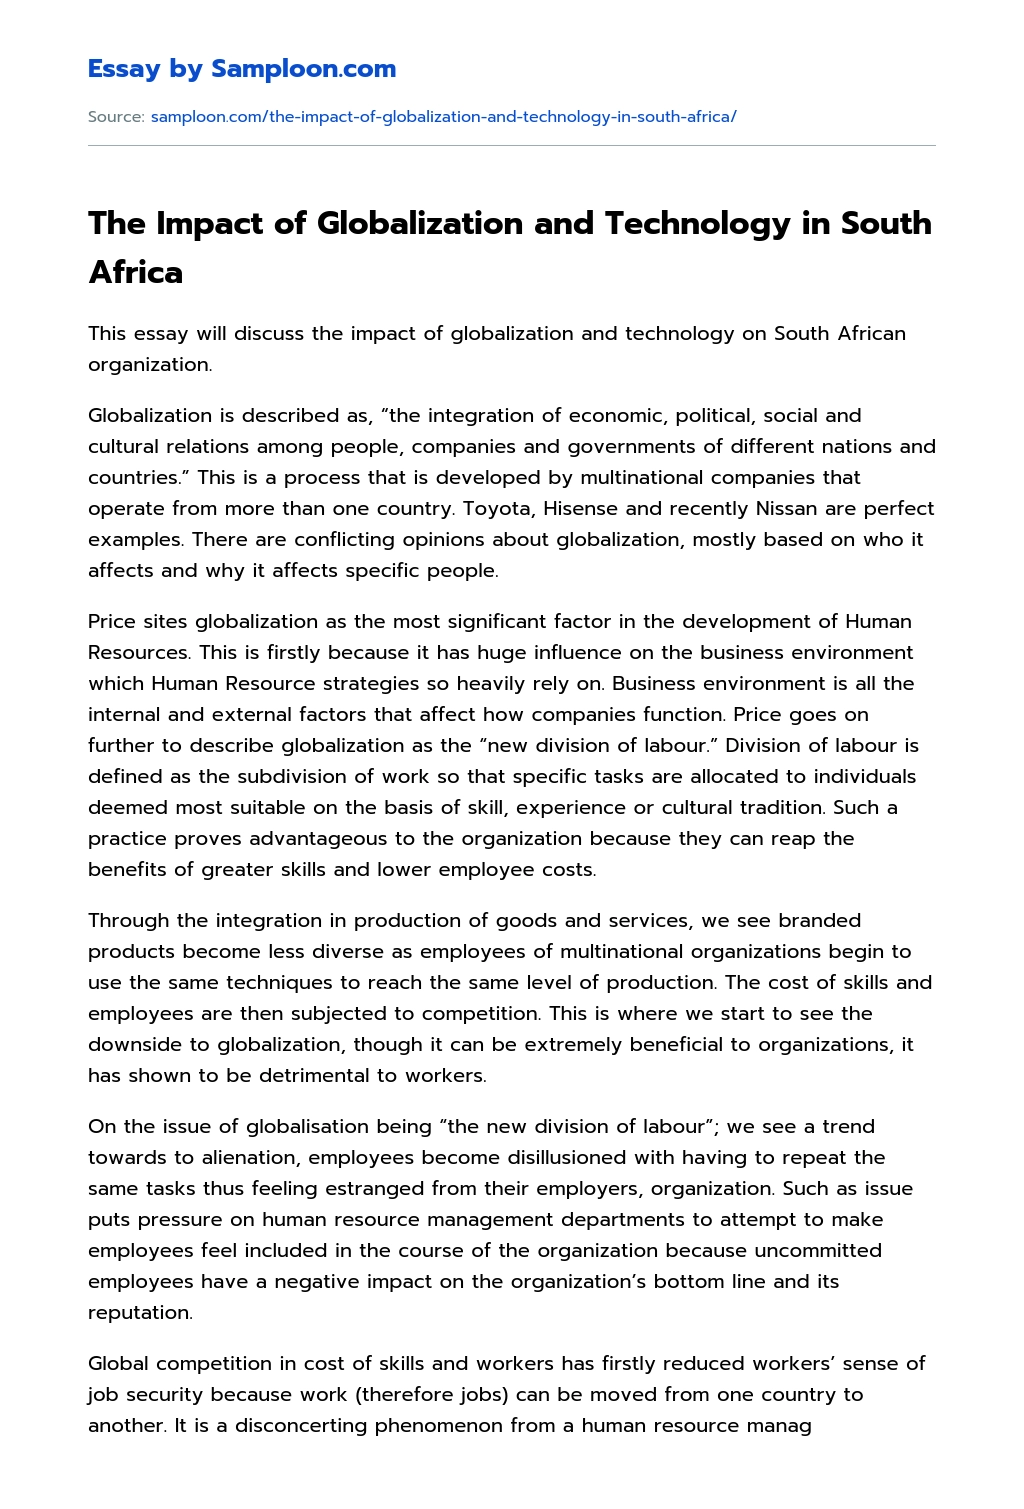 The Impact of Globalization and Technology in South Africa essay